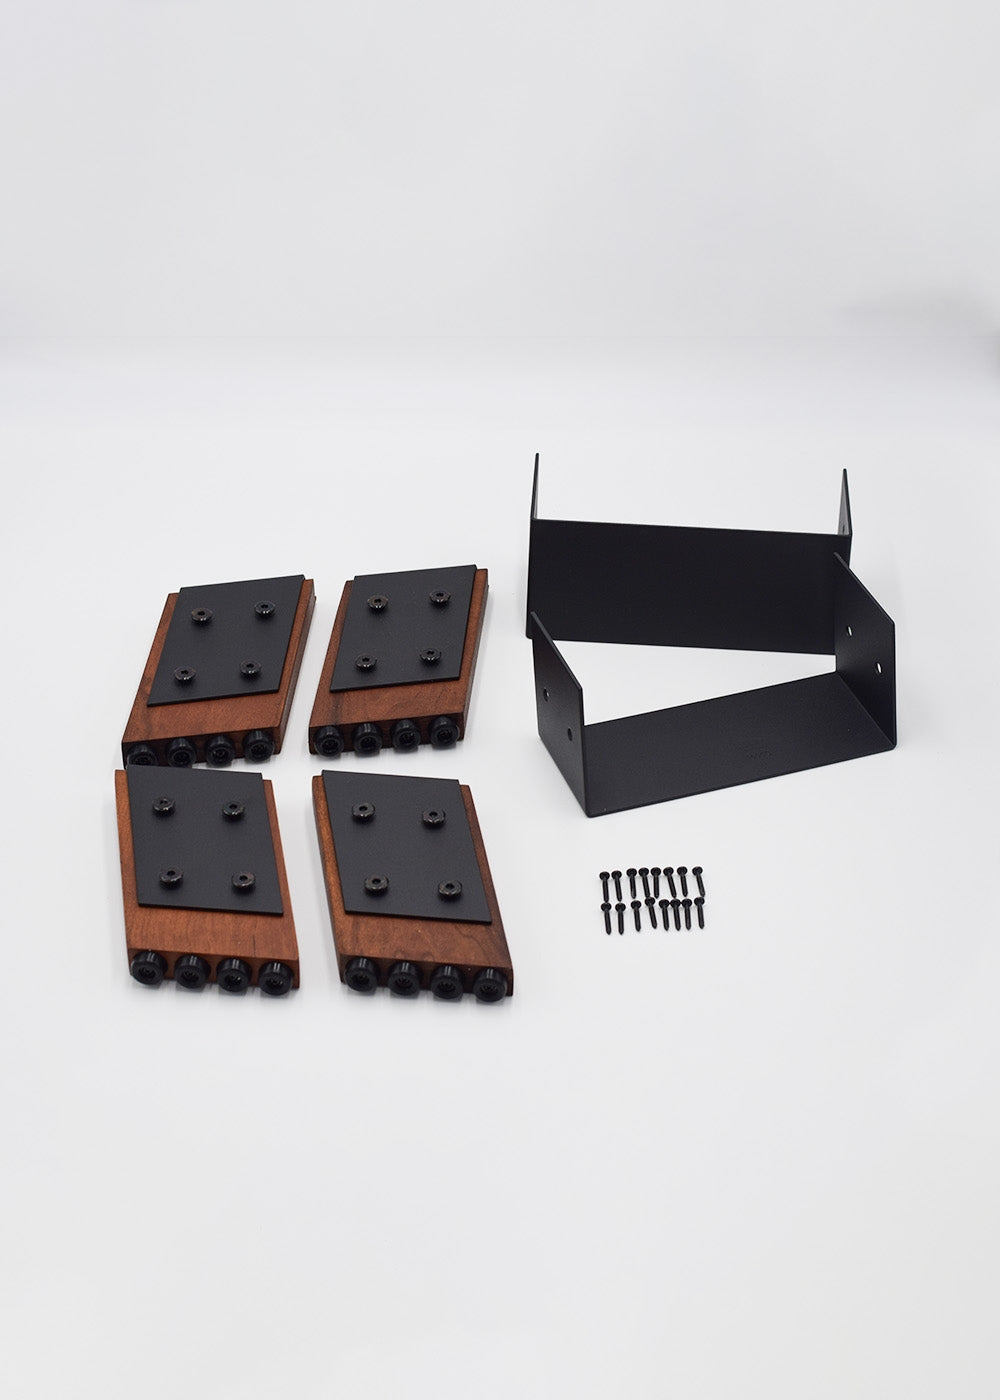 pieces of hiRise adaptor kit showing 4 feet 2 brackets and screws